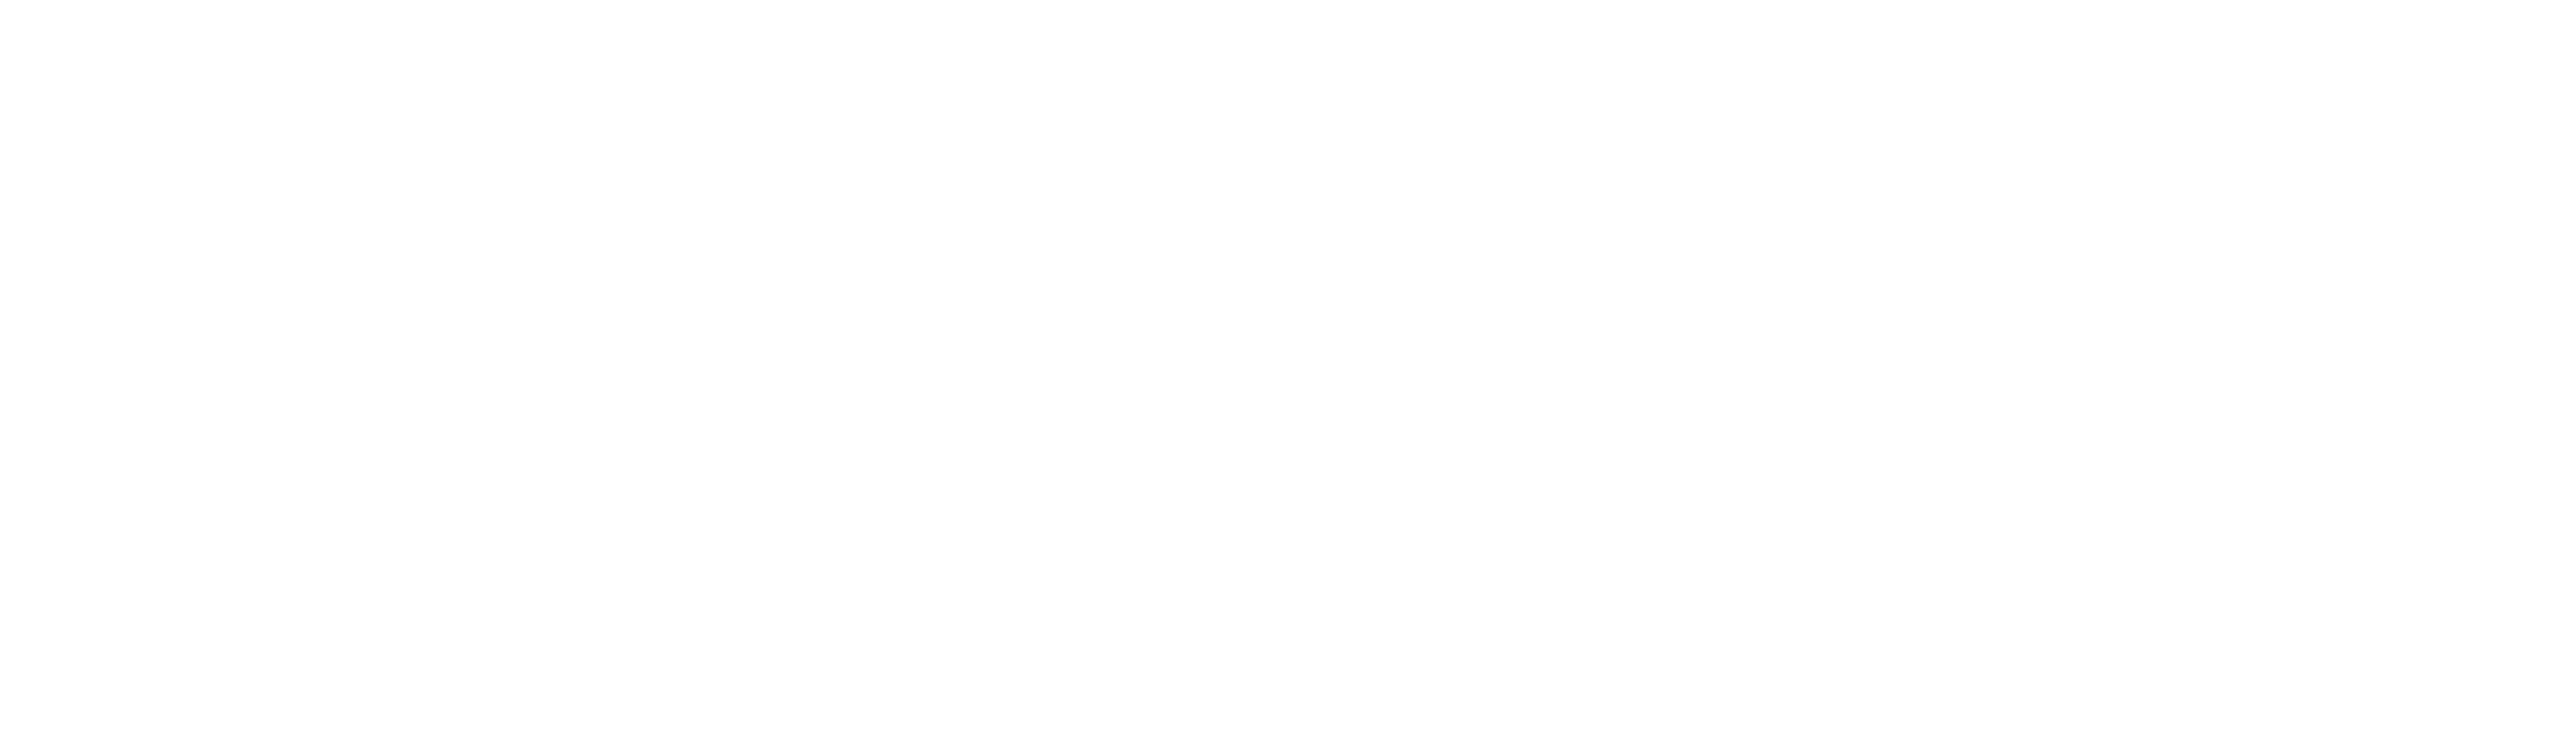 EUROTECH AMERICAL LOGO FIN1C TRANS - Terms & Privacy Policy